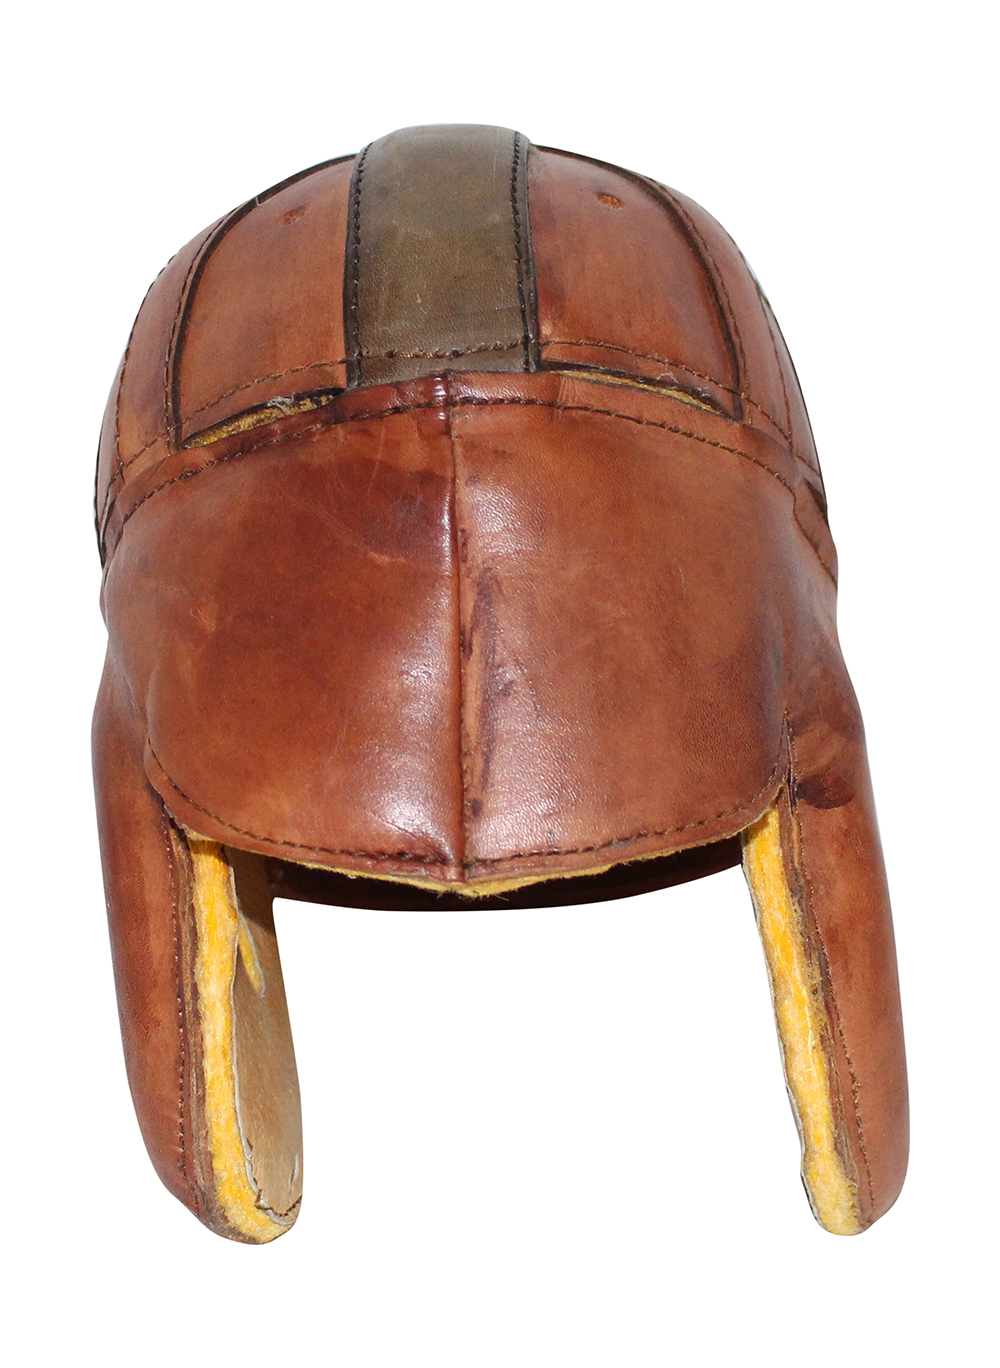 Past Time Full Size Leather Helmet 32238